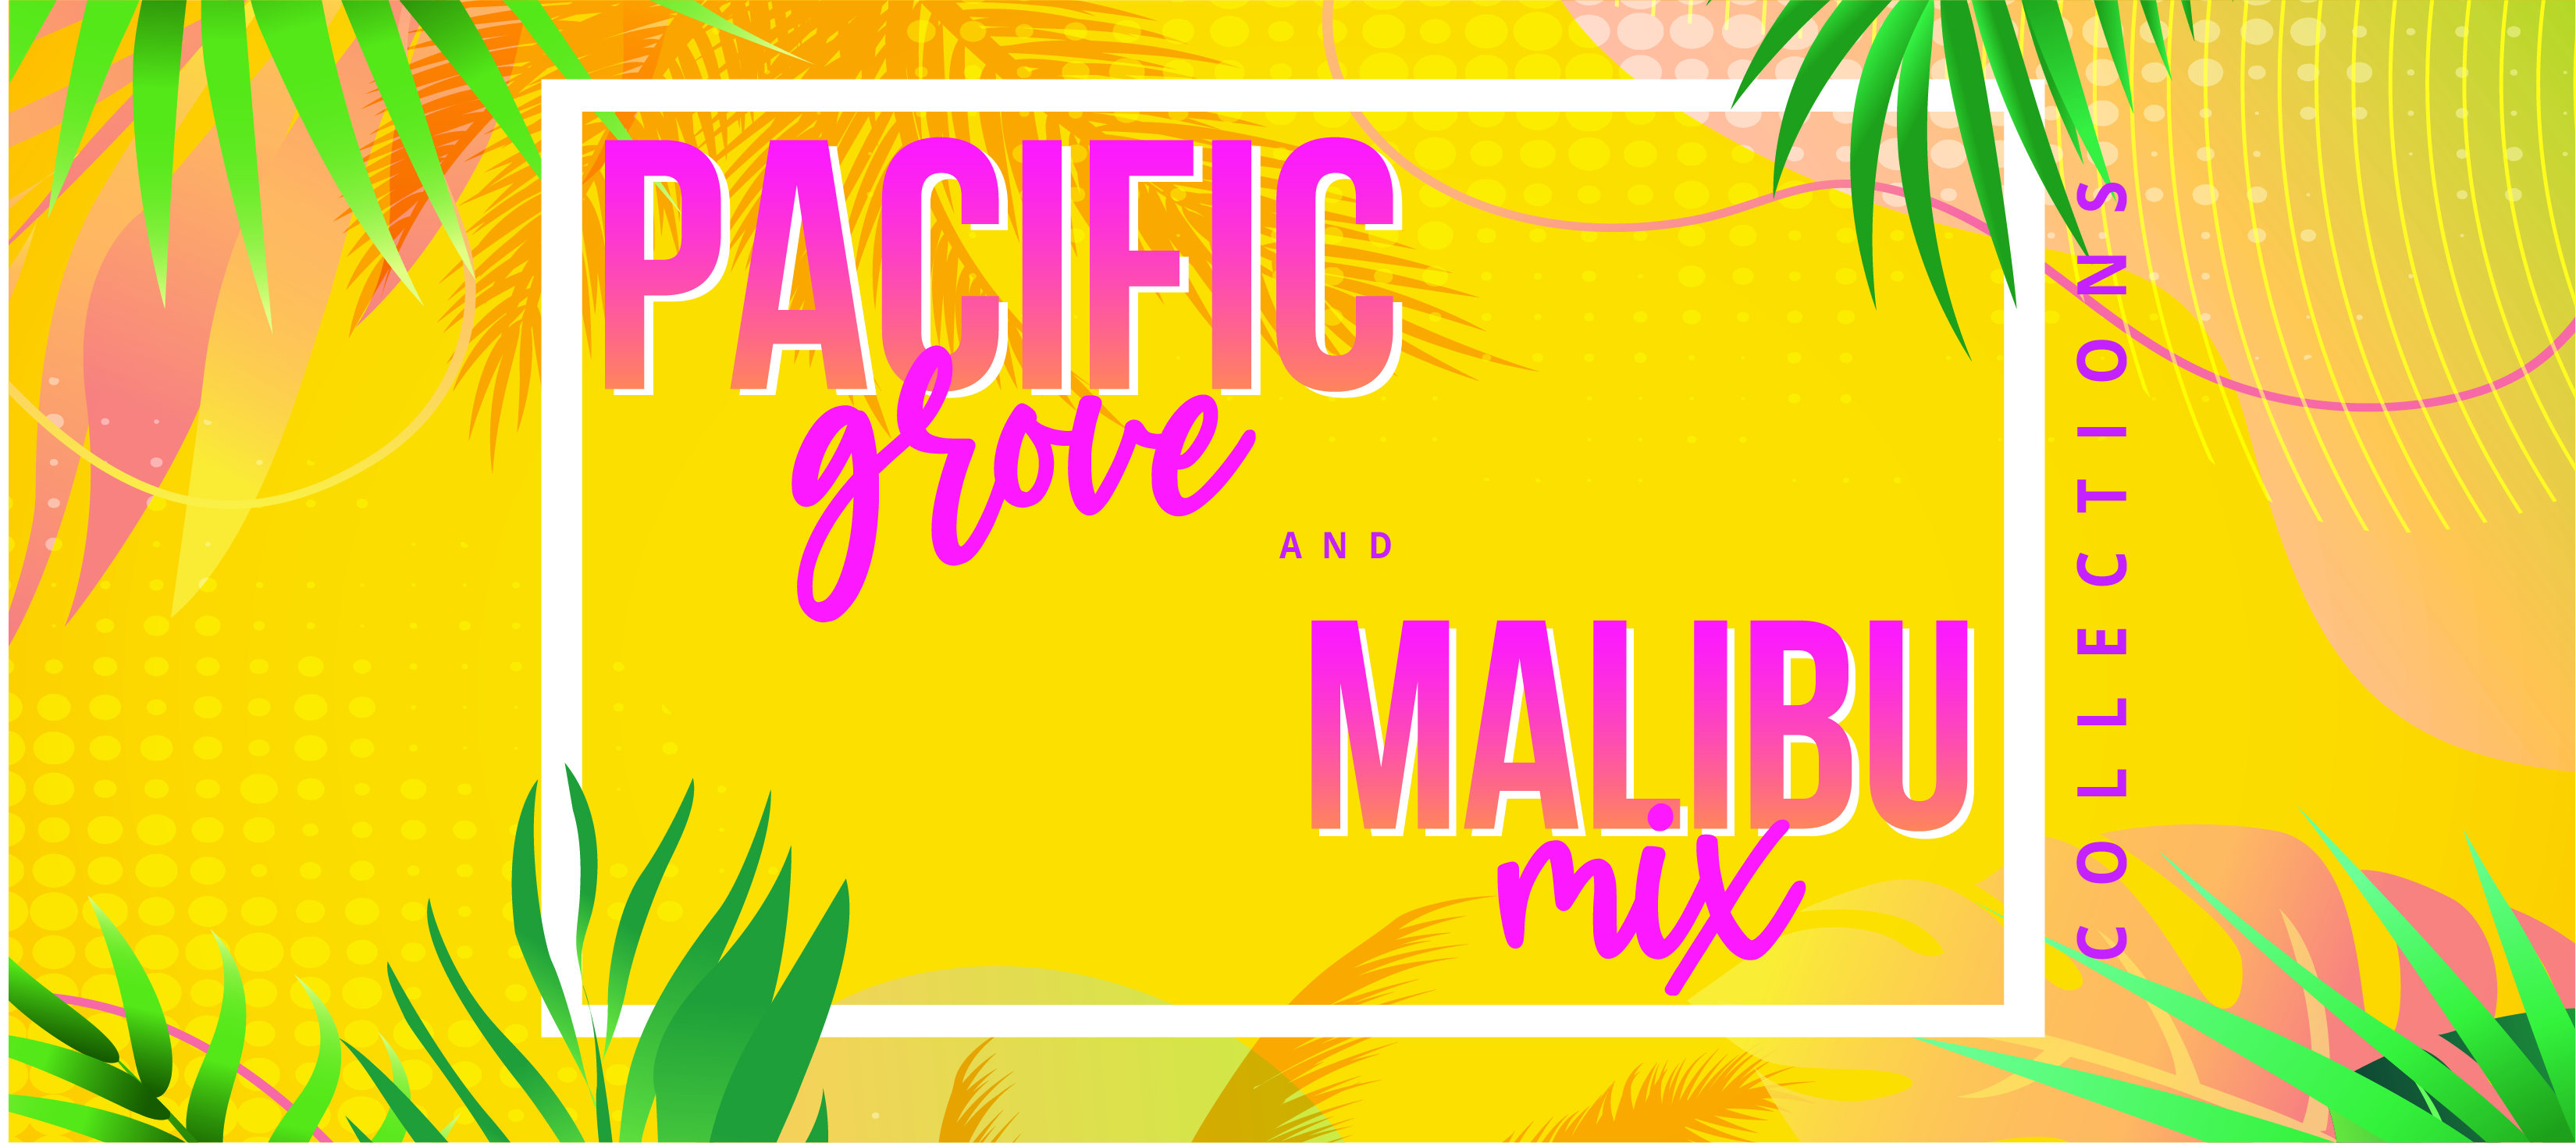 The Pacific Grove & The Malibu Mix Collections